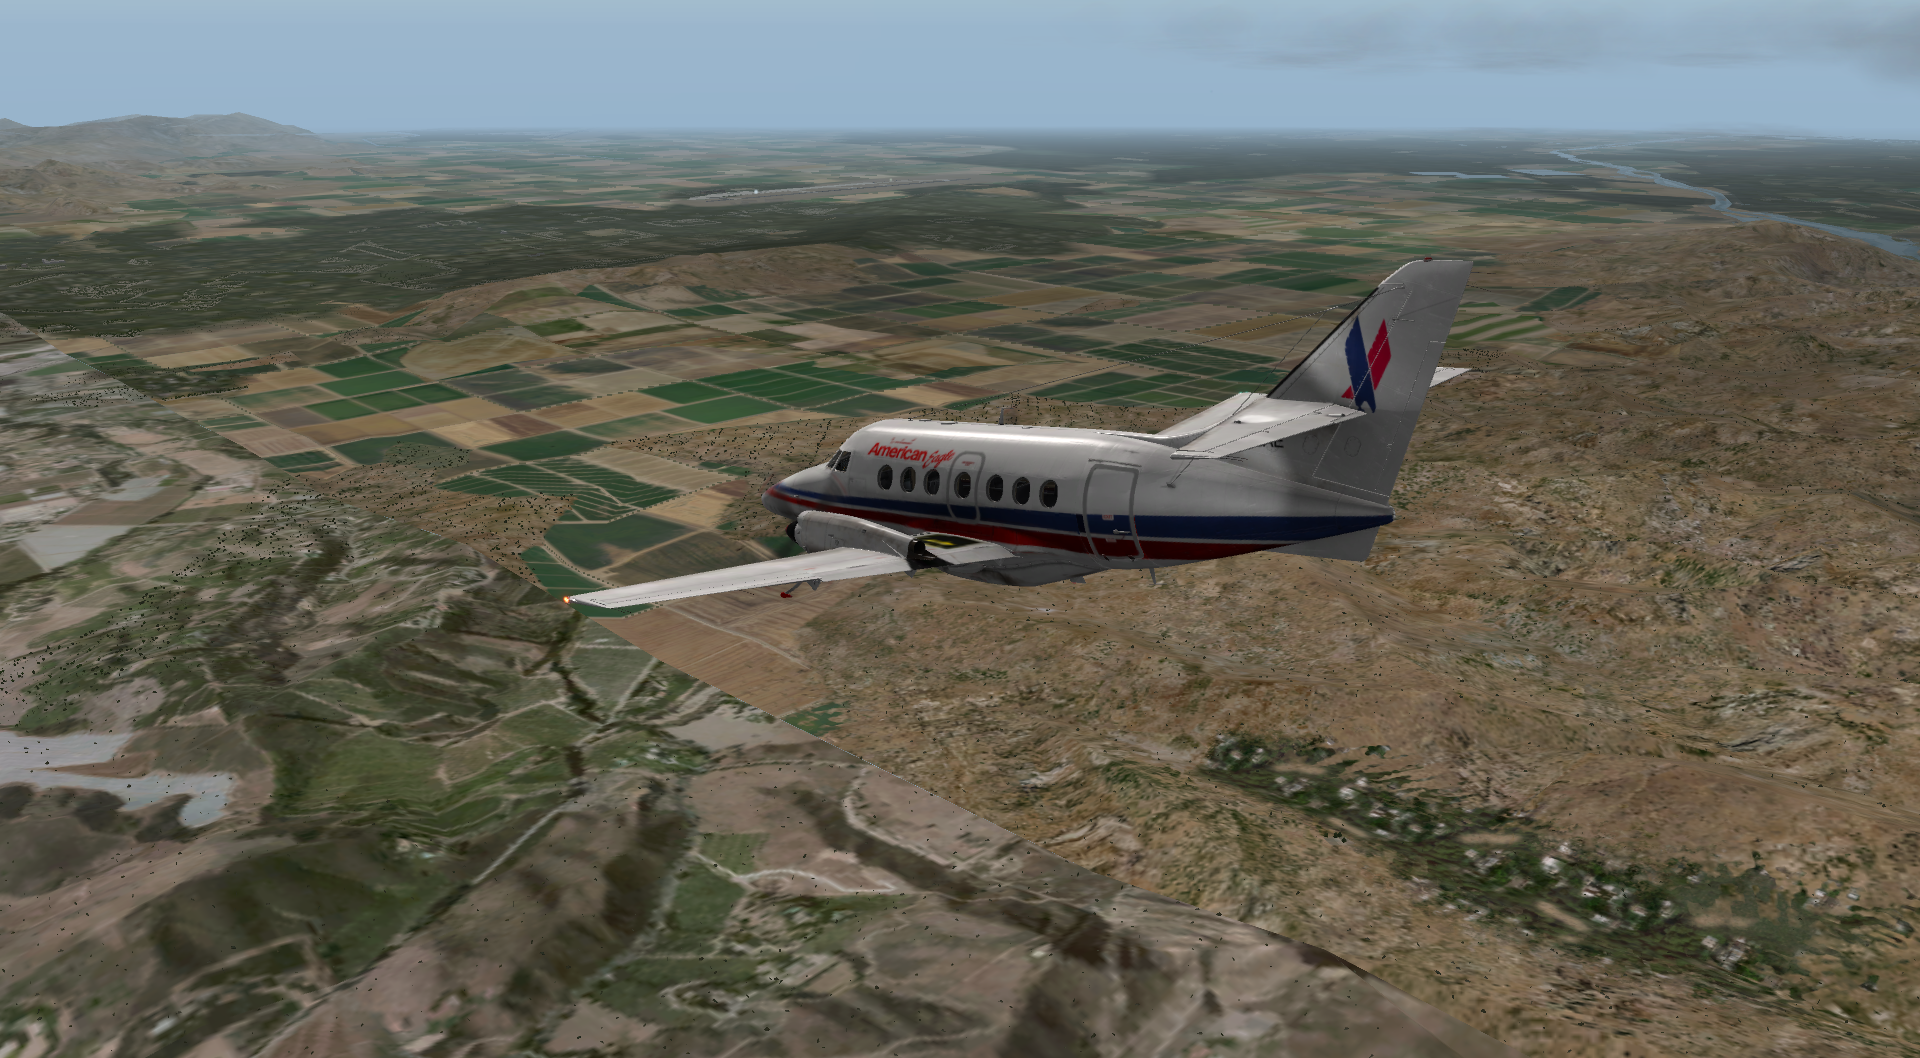 Descending for a visual app. to Rwy 26 with Camarillo just southwest